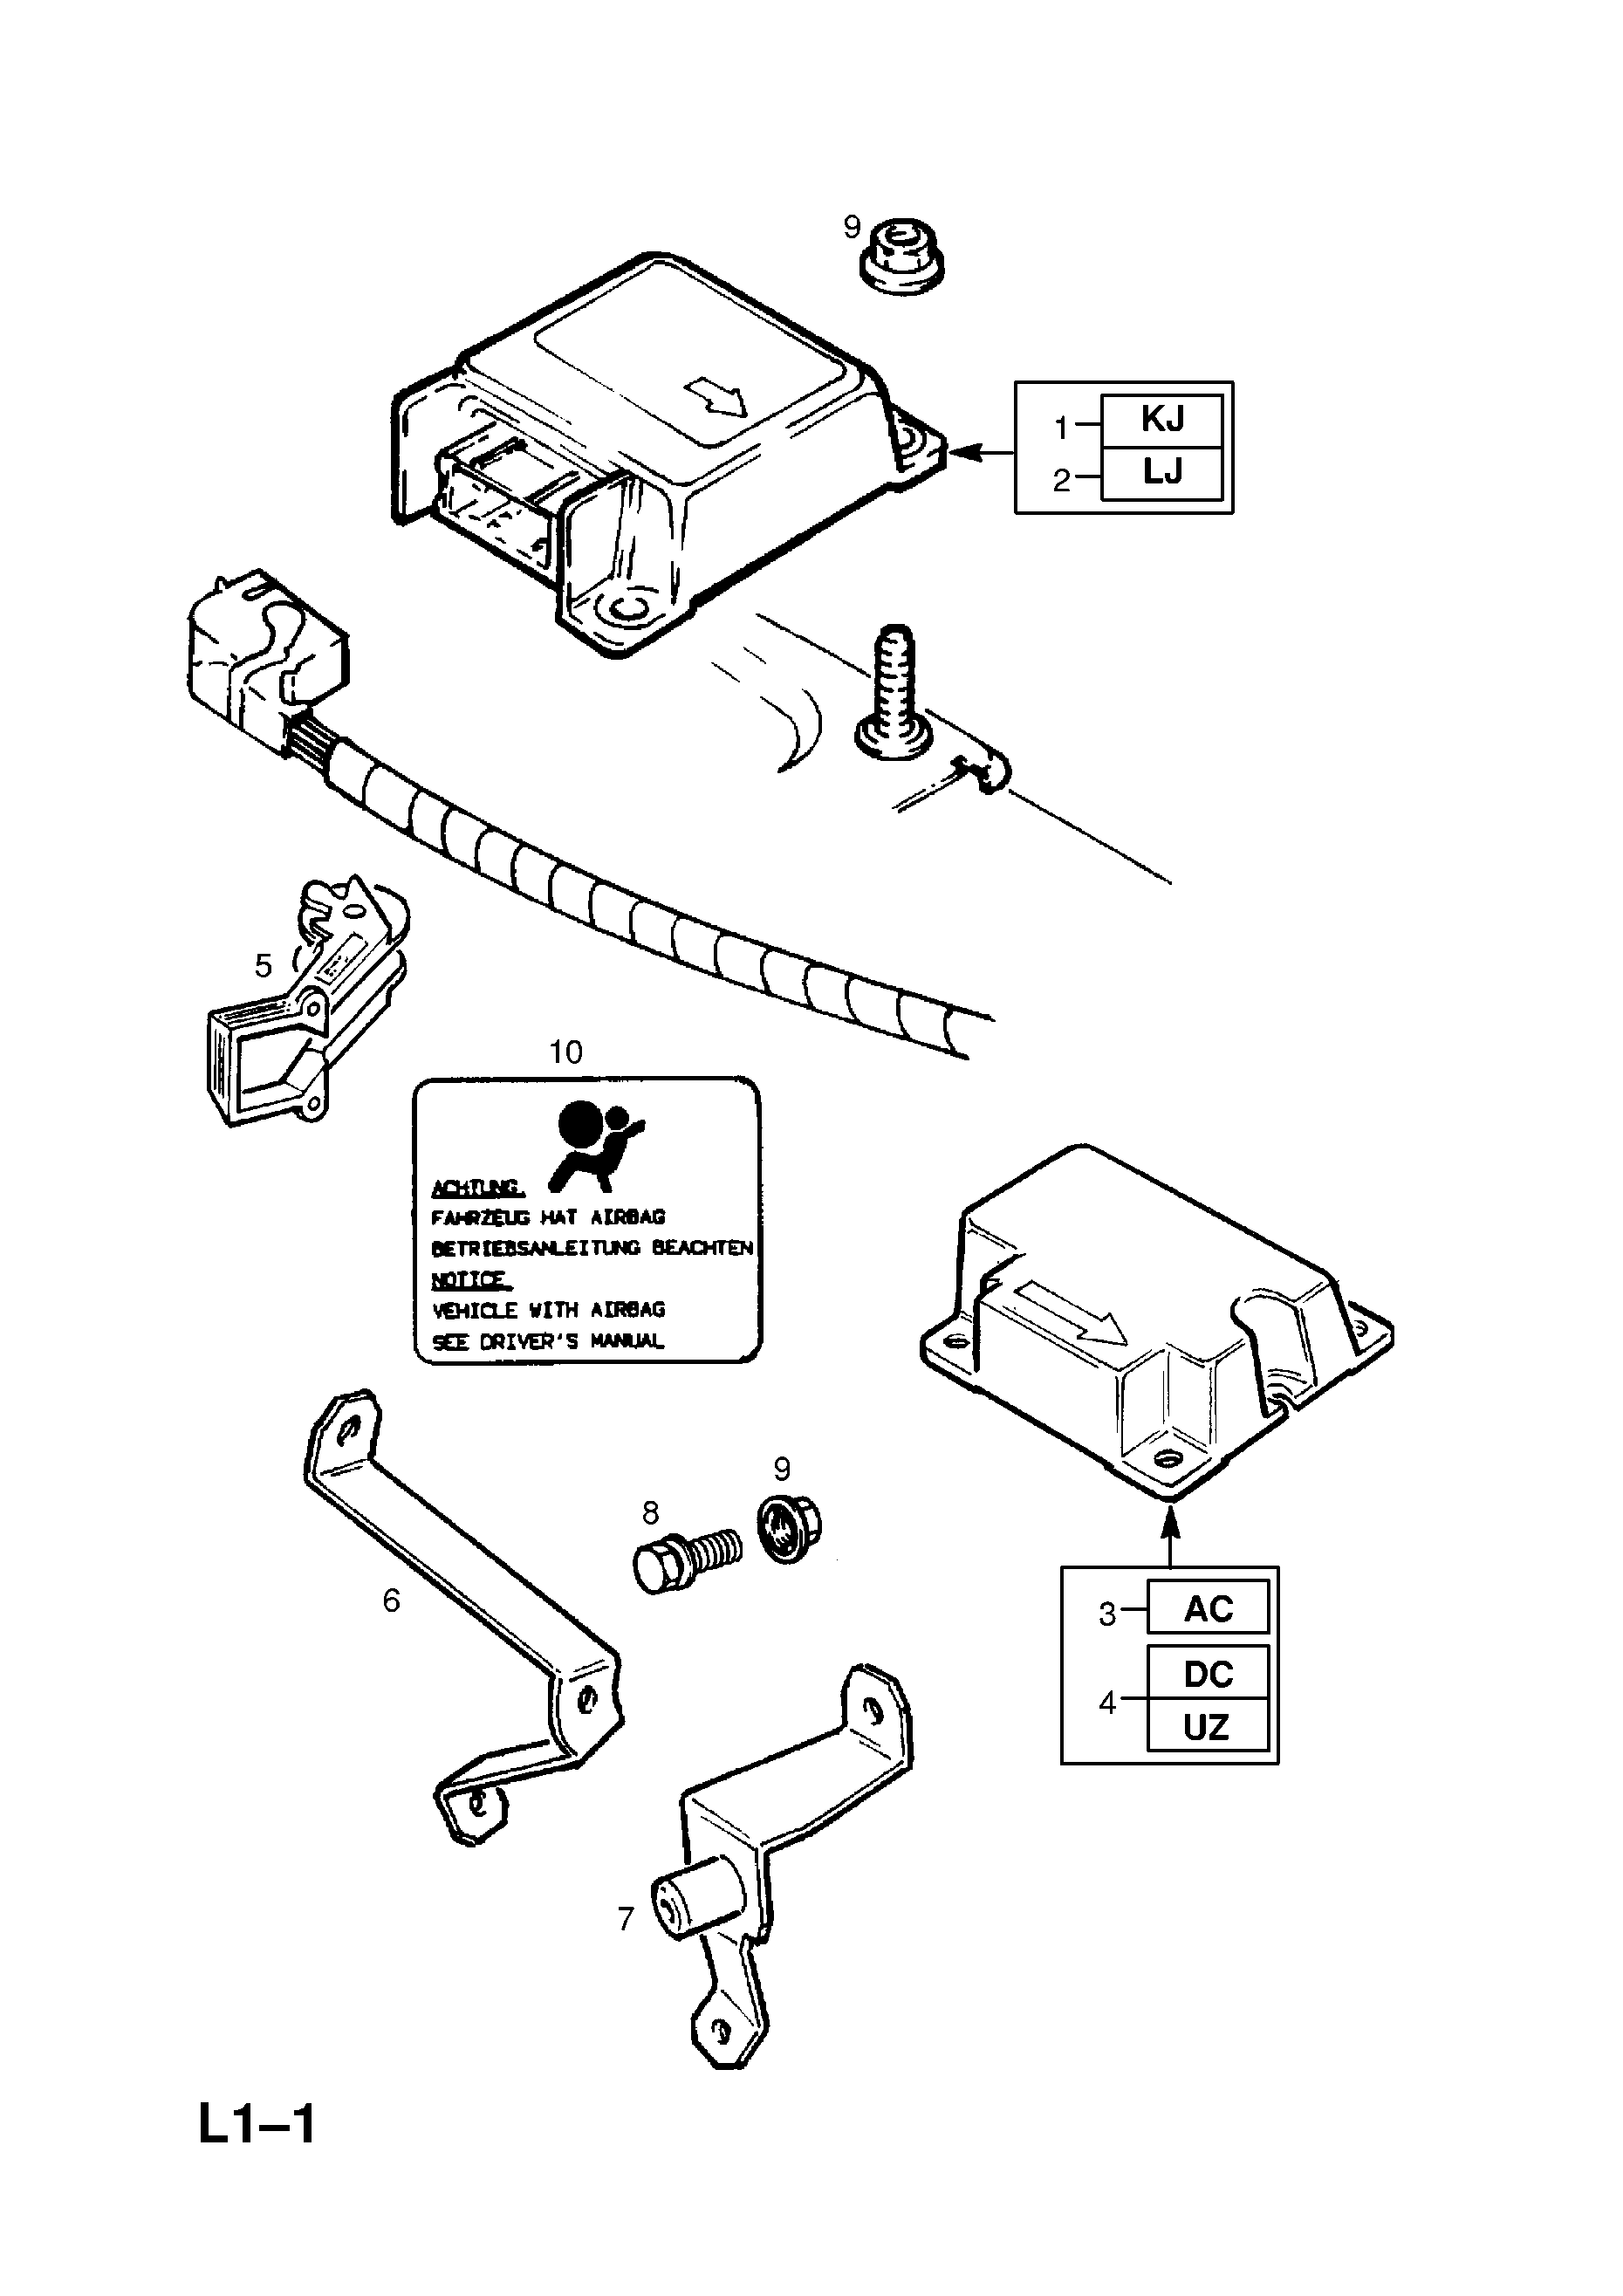 AIR BAG CONTROL UNIT AND FITTINGS